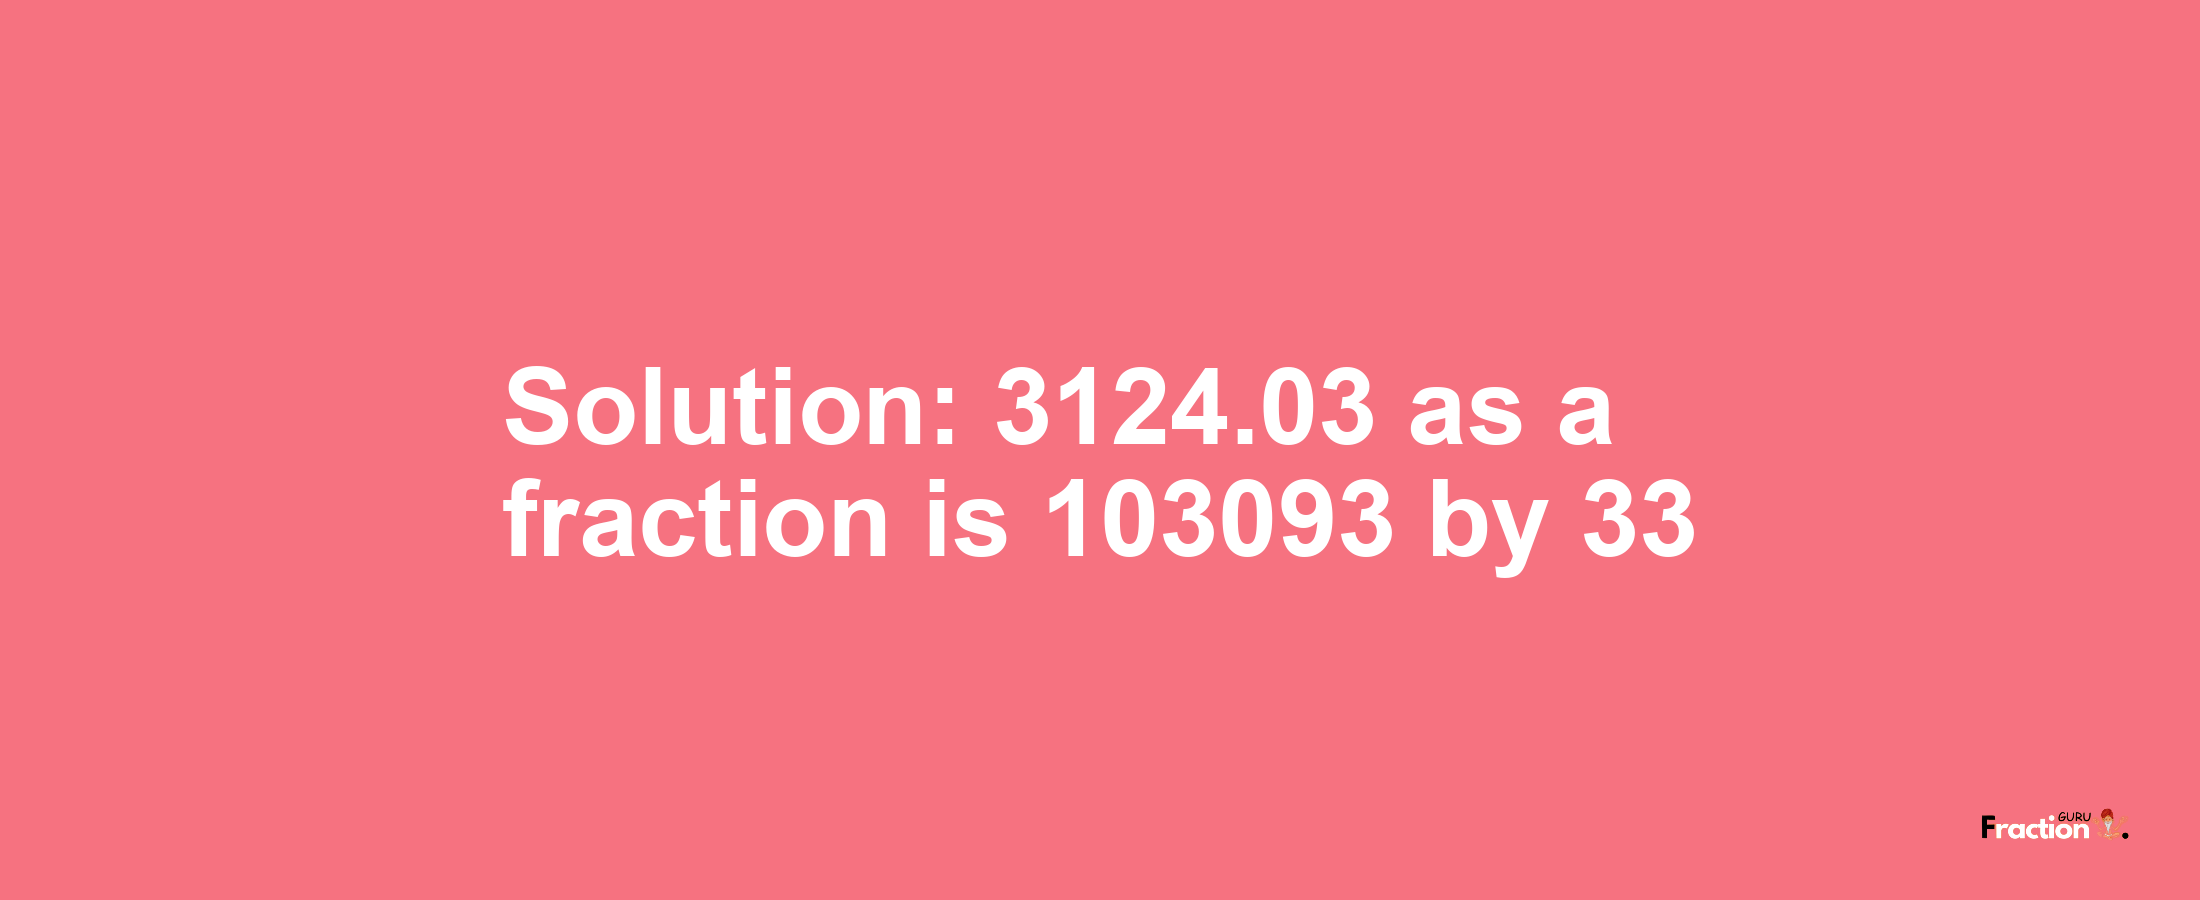 Solution:3124.03 as a fraction is 103093/33